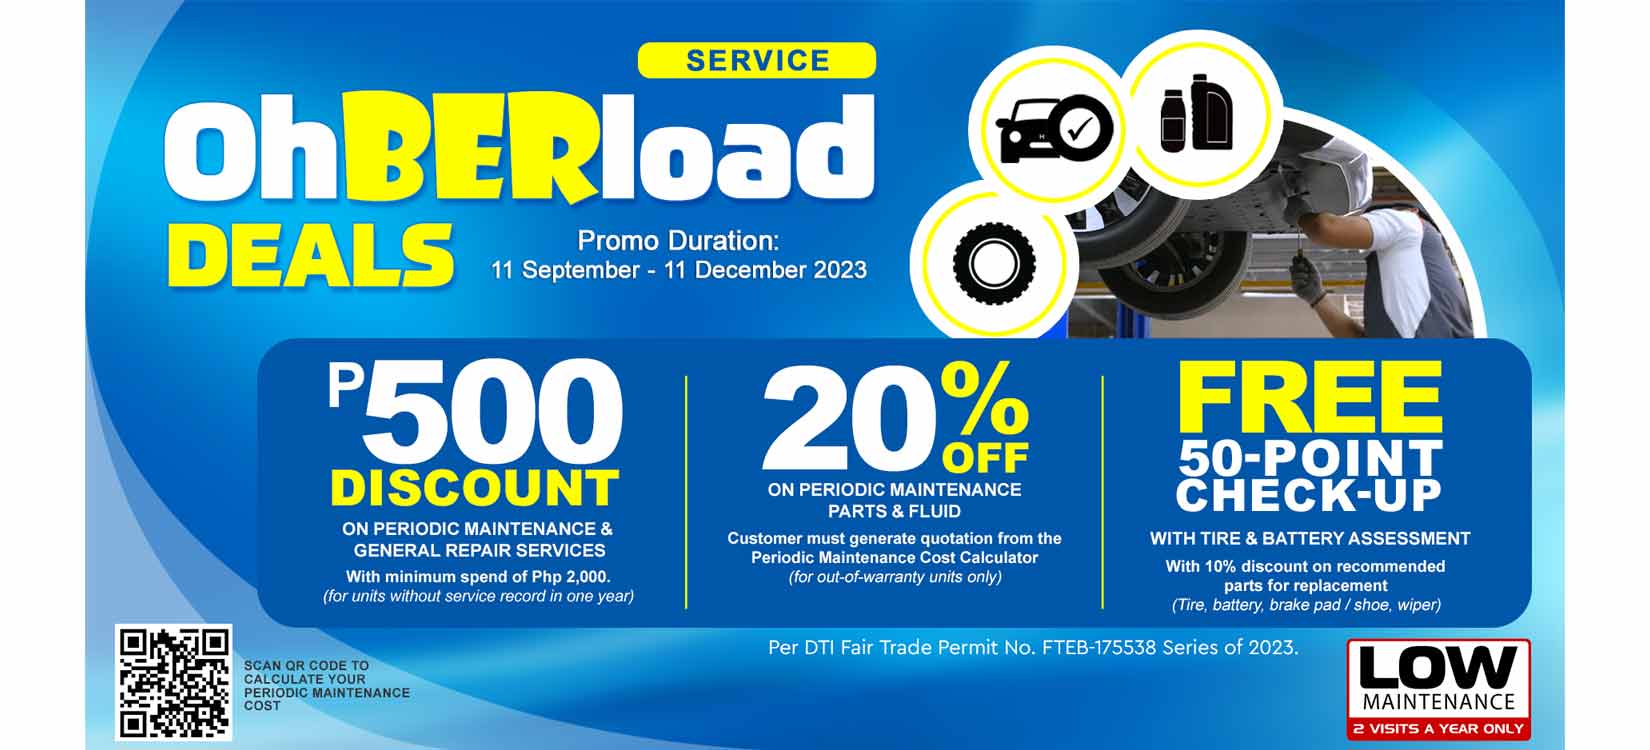 Welcome the Holiday Season with “Oh-BER-load” After-Sales Deals  Exclusive to all Honda vehicle Owners